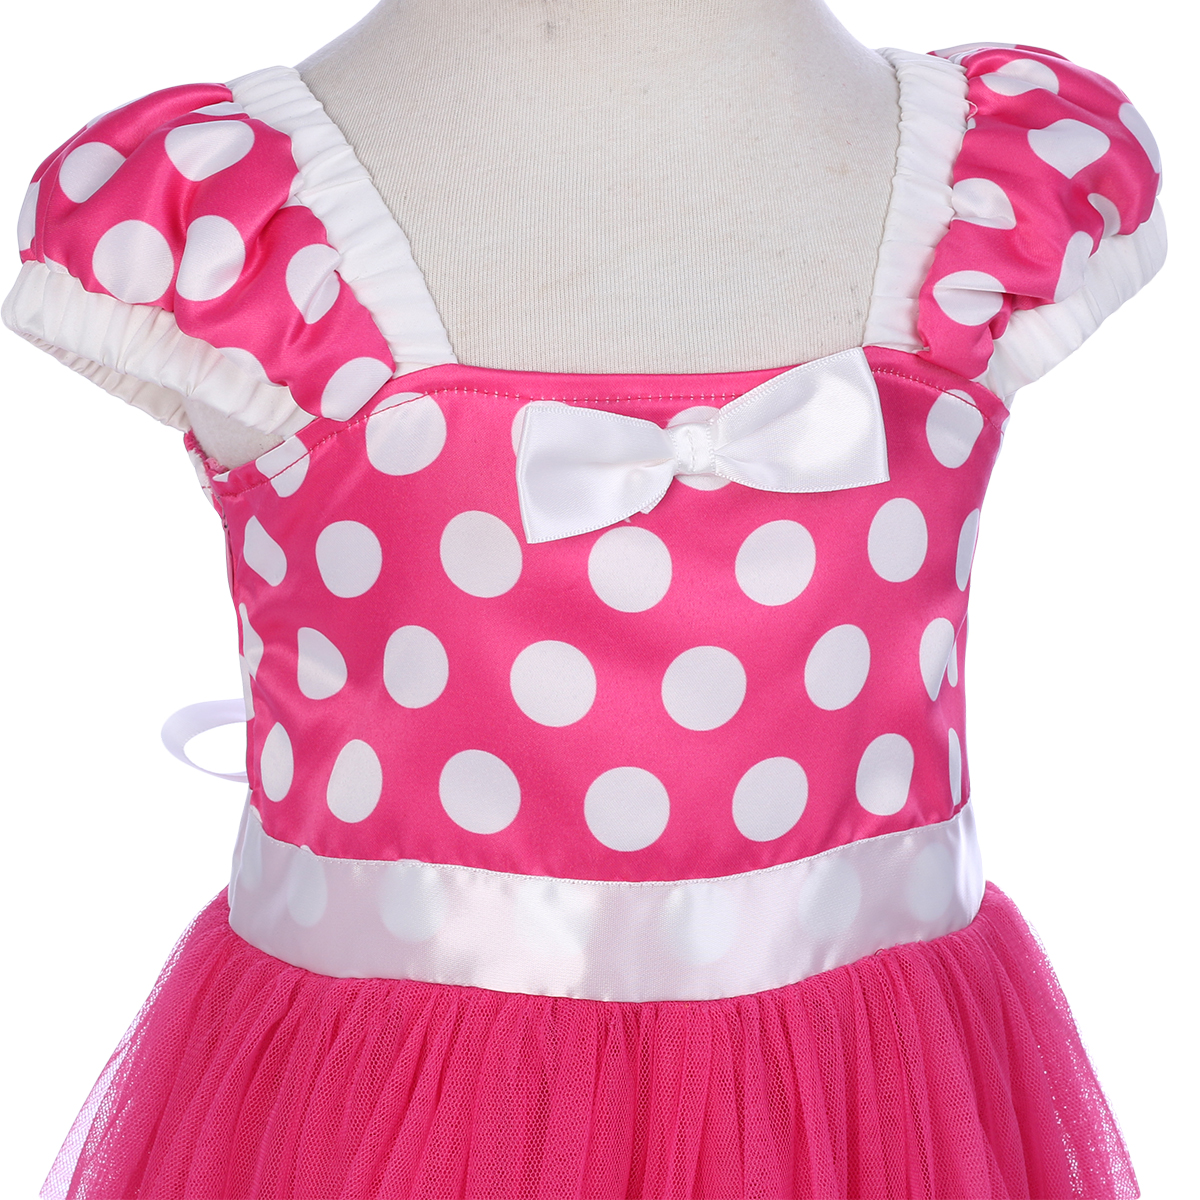 IBTOM CASTLE Toddler Girls Polka Dots Princess Party Cosplay Pageant Fancy Dress up Birthday Tutu Dress + Ears Headband Outfit Set 3-4 Years Hot Pink - image 5 of 8